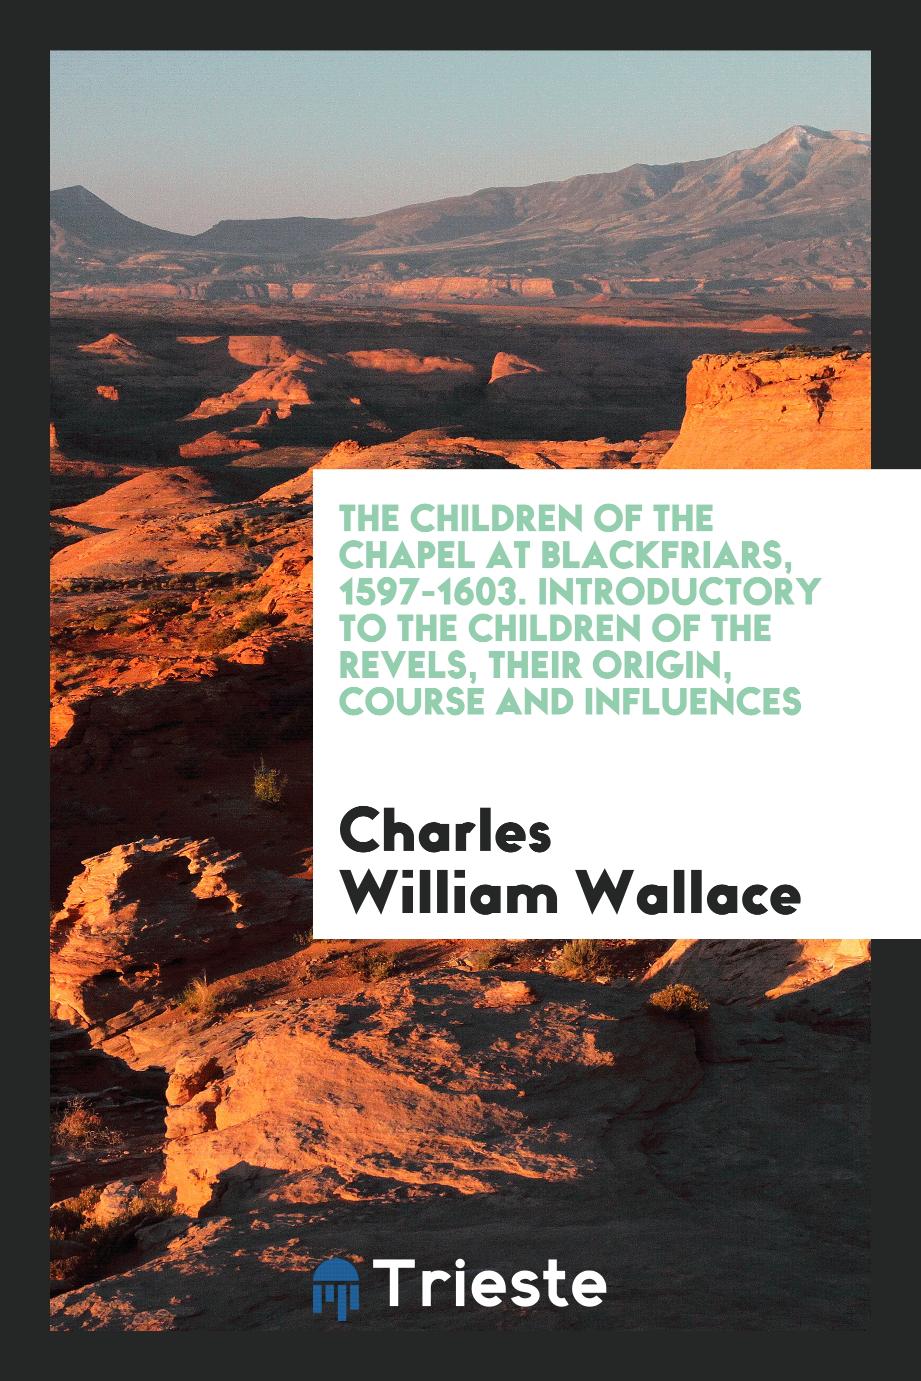 The children of the chapel at Blackfriars, 1597-1603. Introductory to The children of the Revels, their origin, course and influences